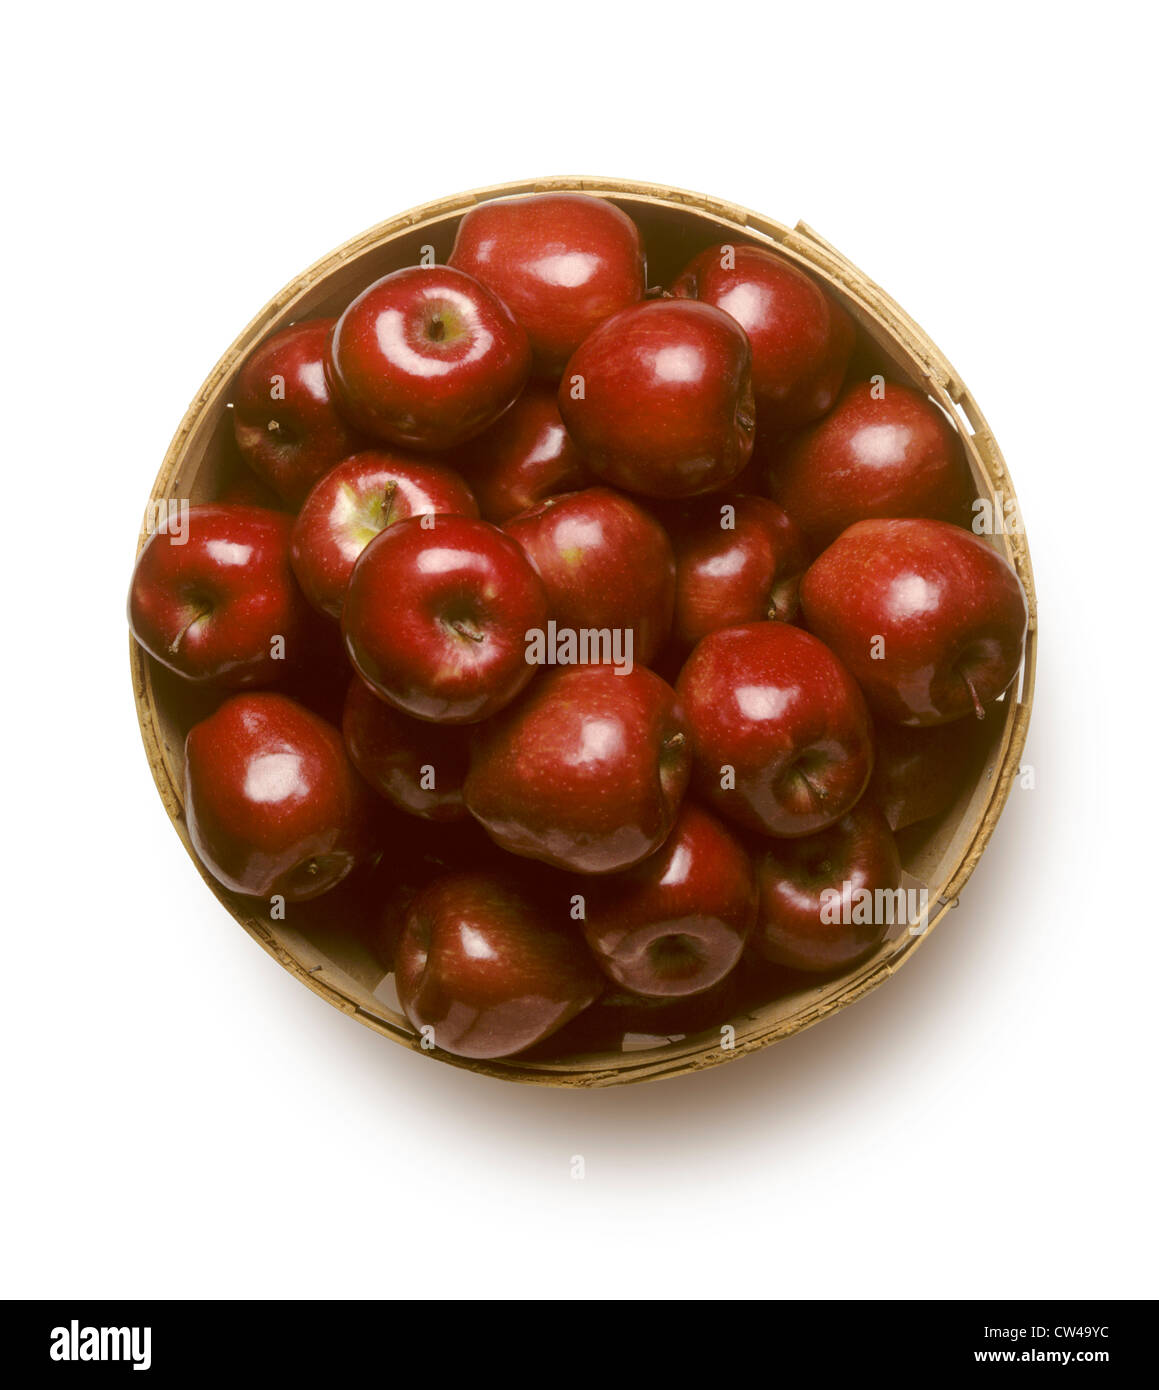 Bushel basket of Red Delicious apples isolated on white background Stock Photo